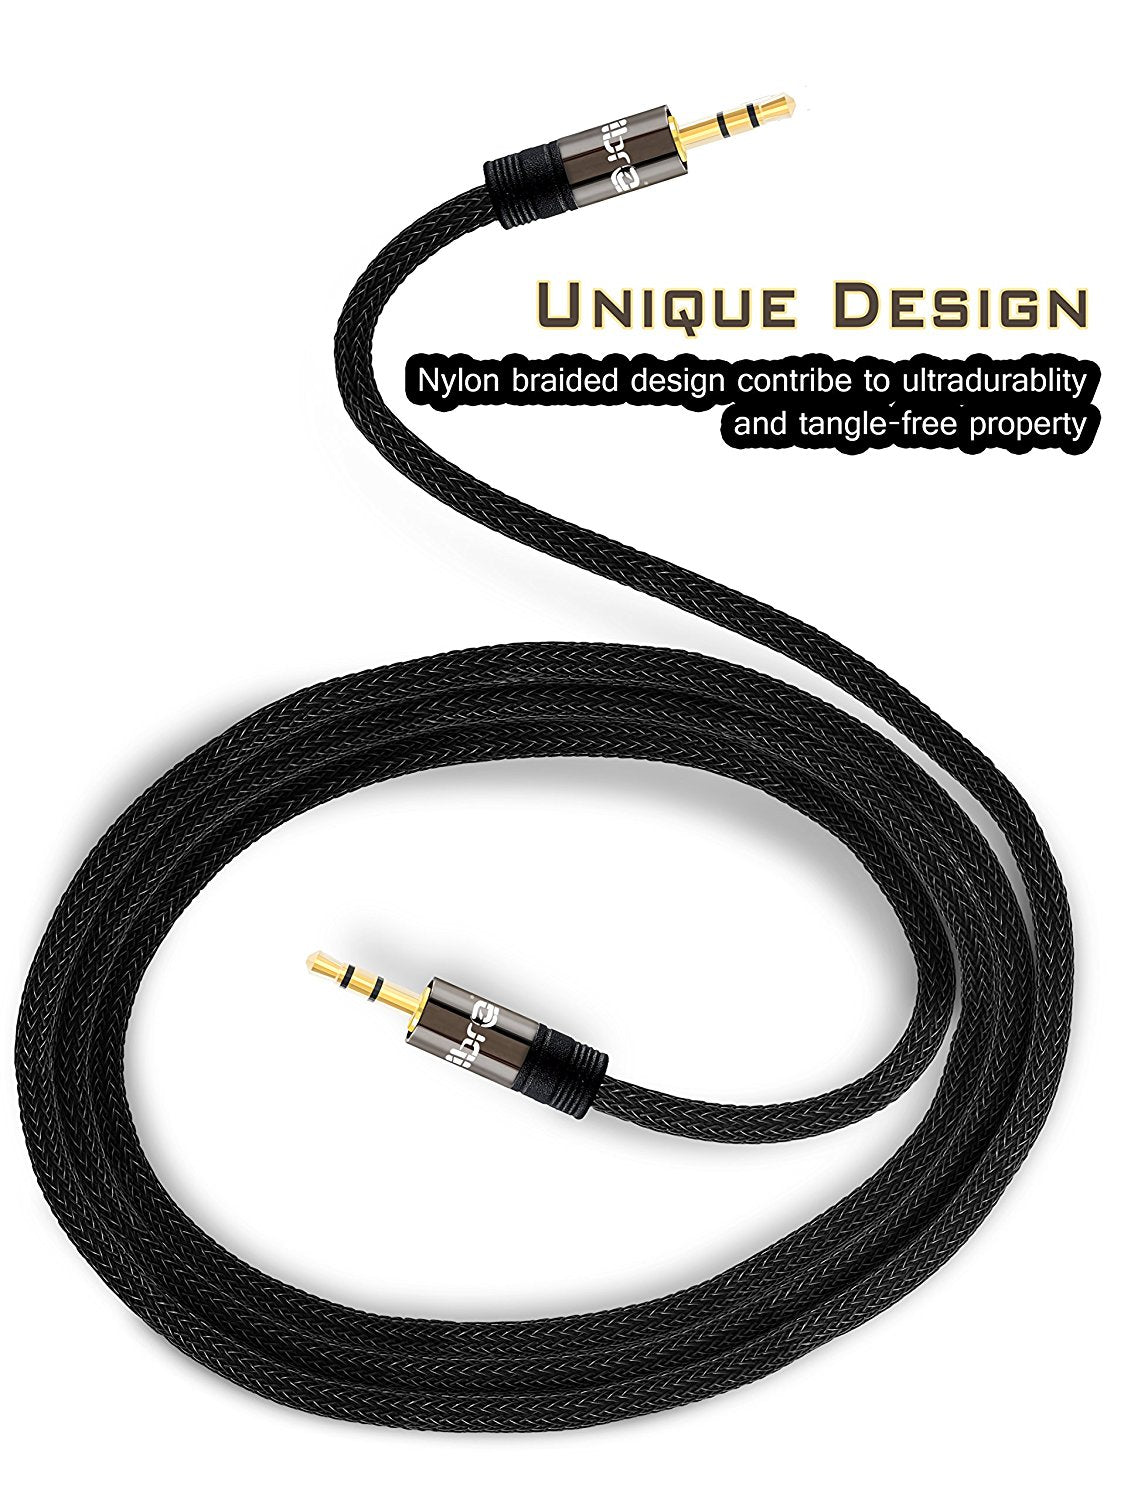 3.5mm Stereo Jack to Jack Audio Cable Lead Gold 2m- IBRA Gun Series